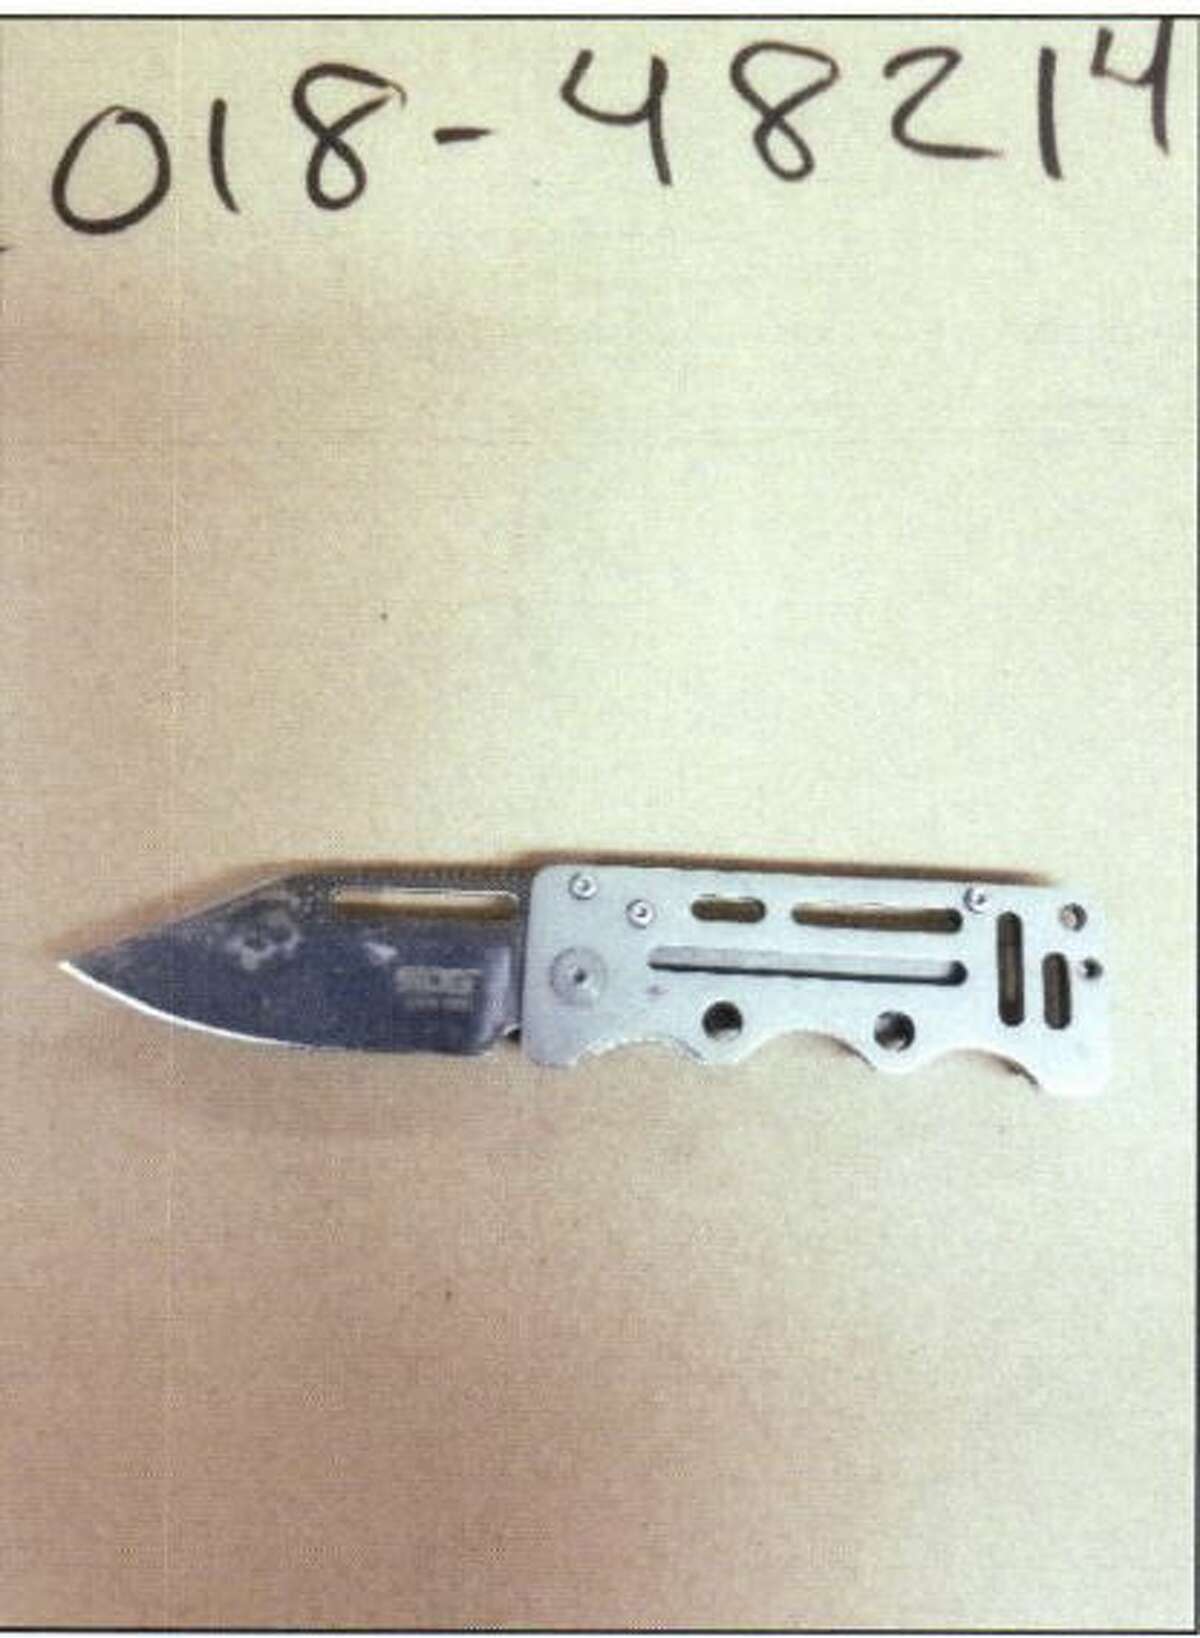 Police say they recovered this knife from 46th Avenue South and South Henderson Street, where 32-year-old Ahmed Abdi-Dahar allegedly claimed he buried the weapon after stabbing a 17-year-old stranger on the street.